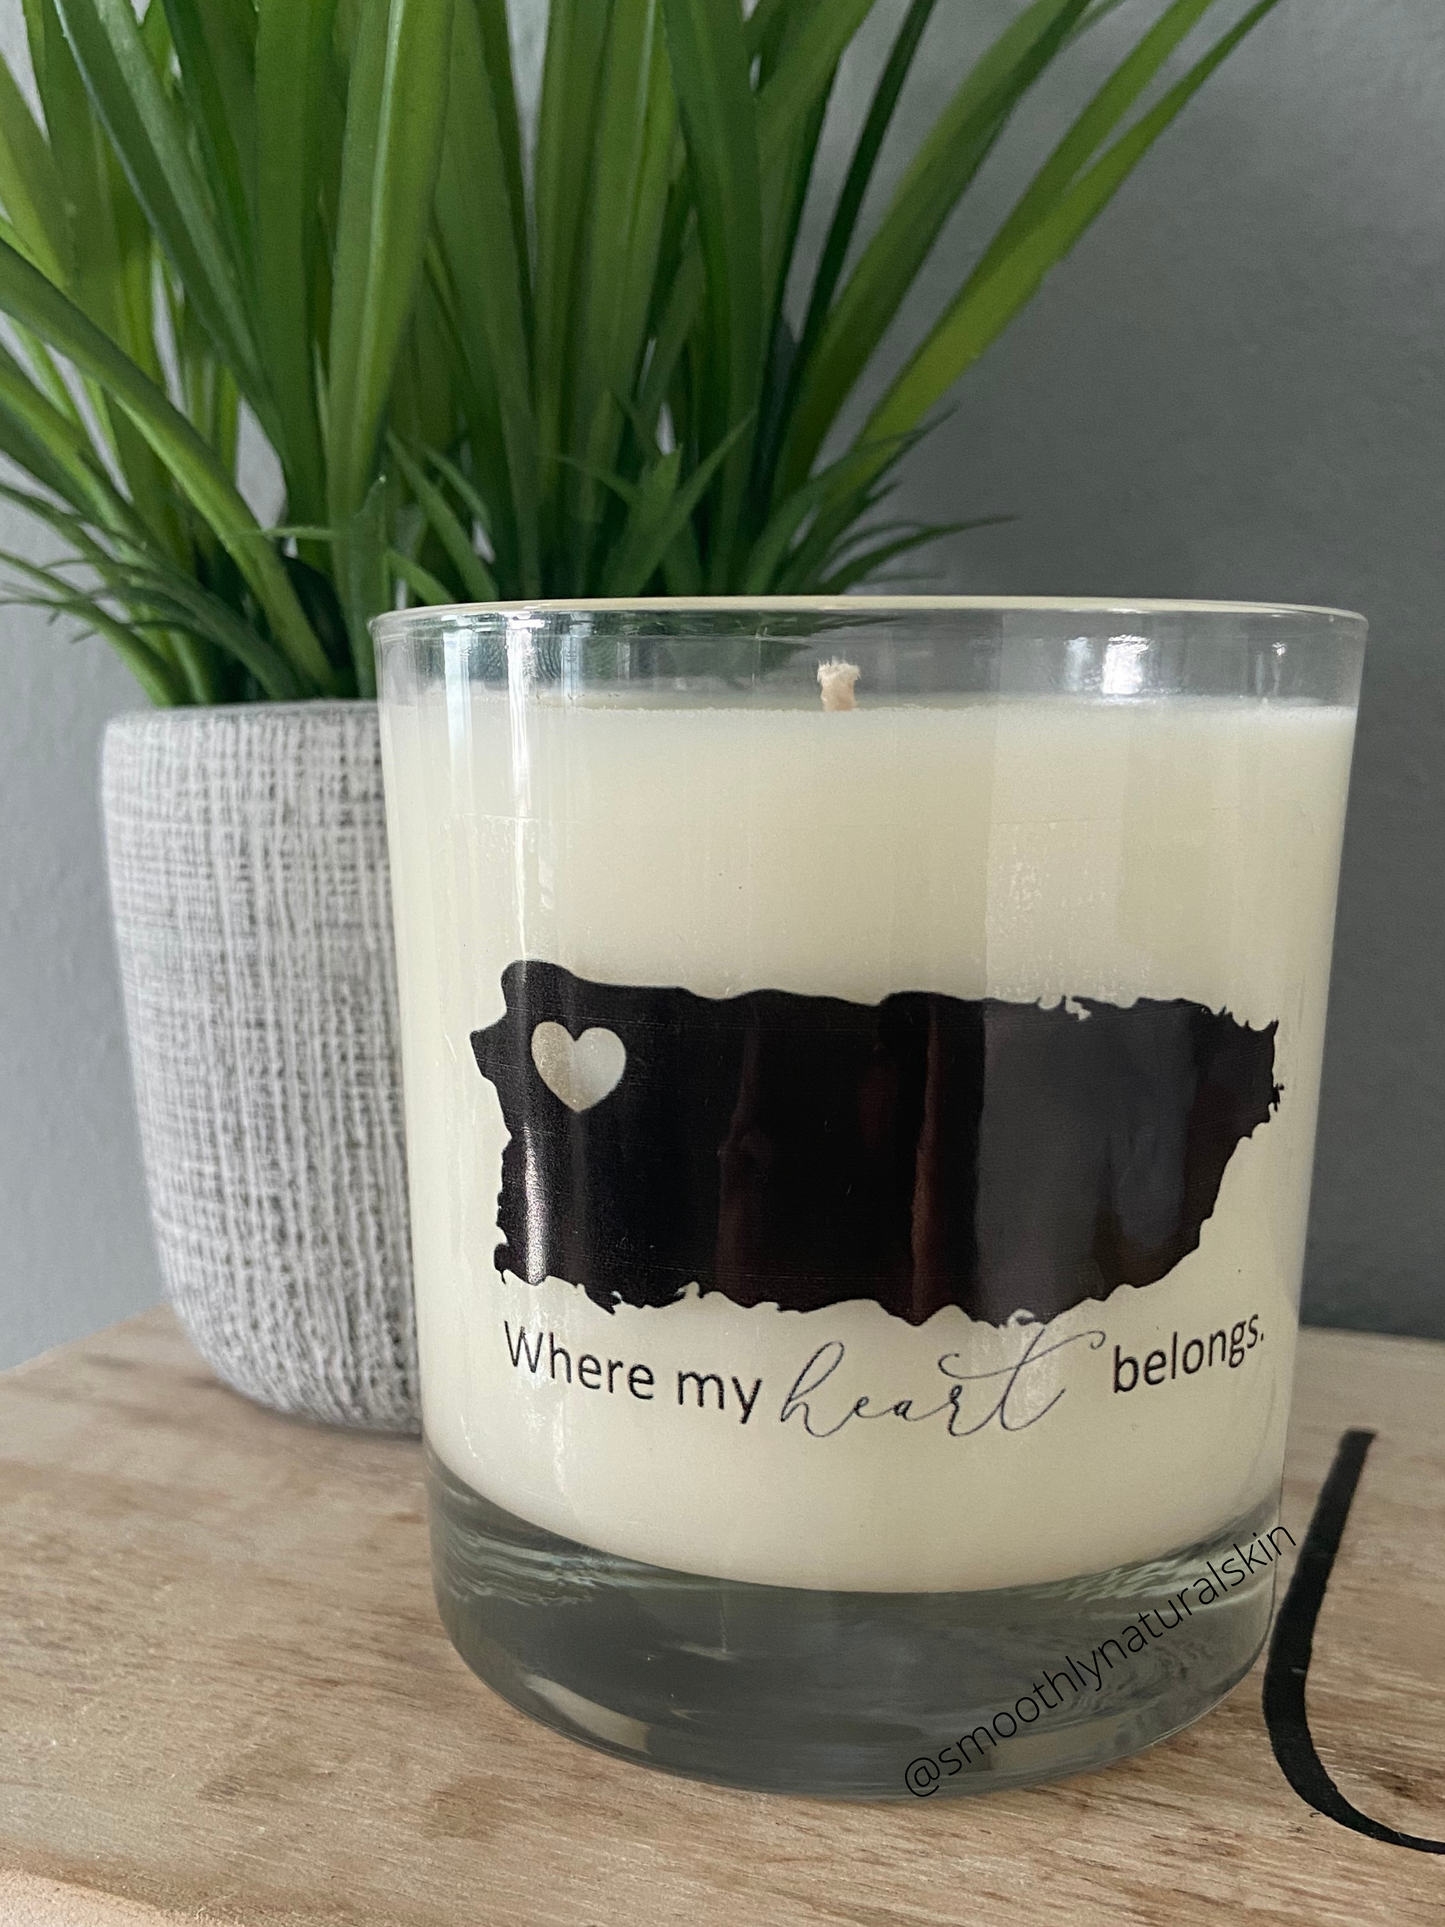 Puerto Rico where my heart belongs candle, these unique candles are hand poured in small batches.   Ingredients:   Natural Soy Wax, Cotton Wick (Lead & Zinc Free) and Phthalate Free Fragrance.  Volume: Net Wt. 7 oz. Smoothly Natural Skin 